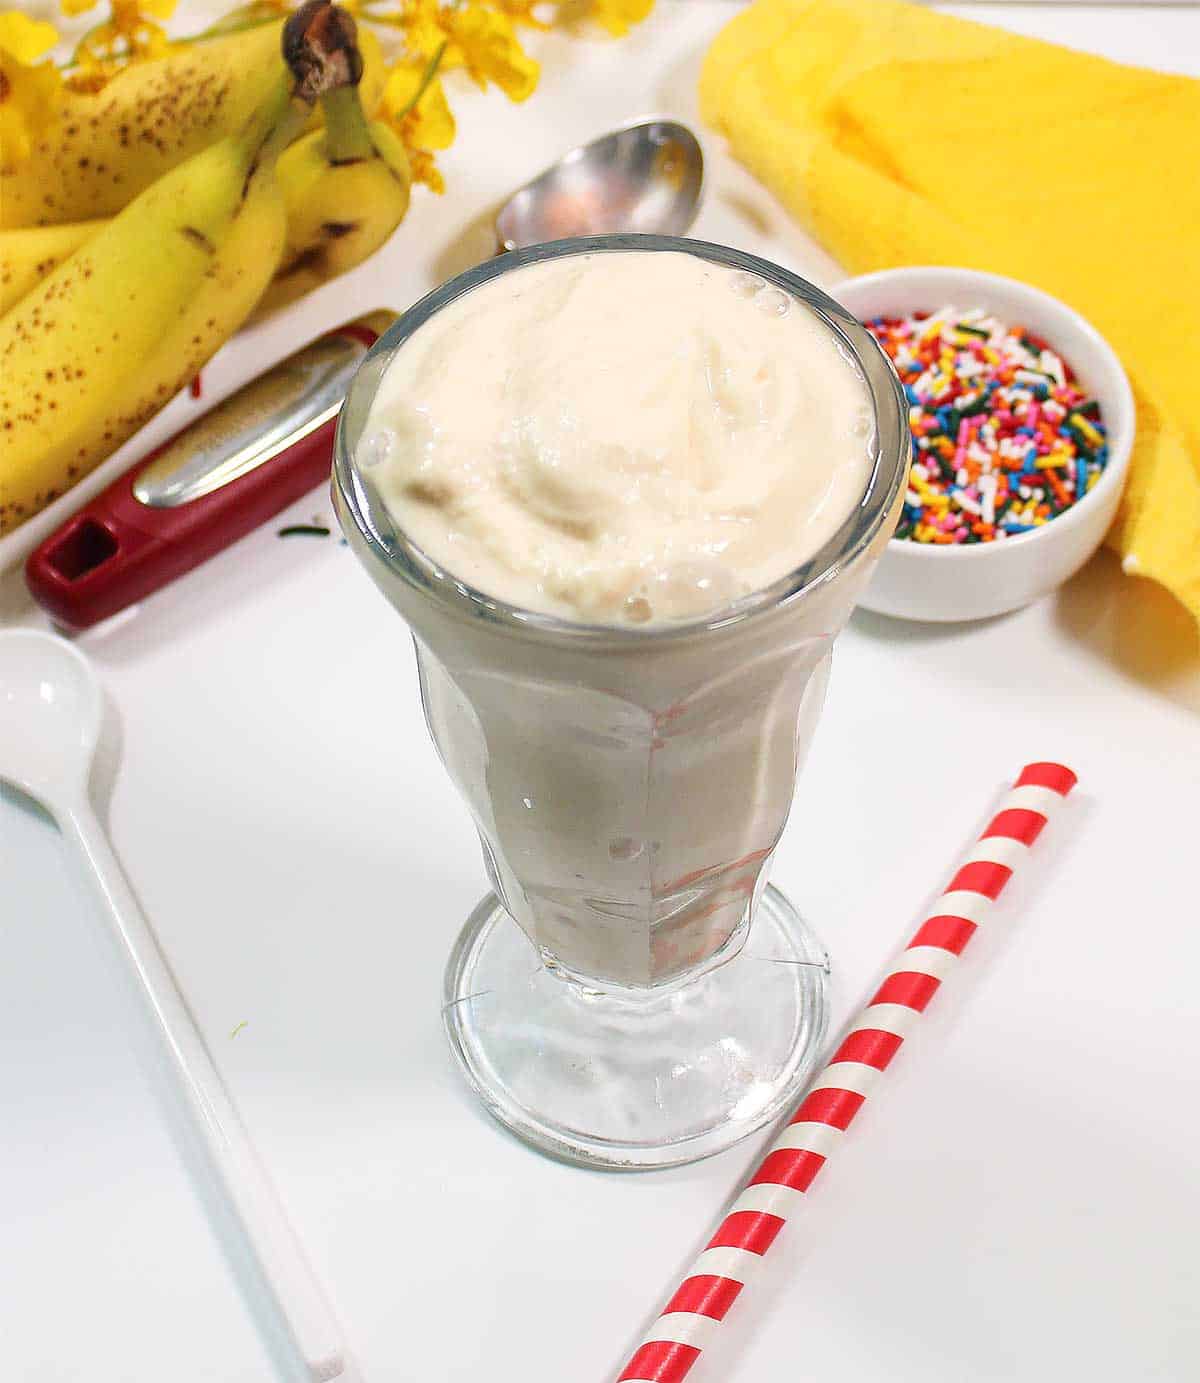 Milkshake in a glass with no toppings.